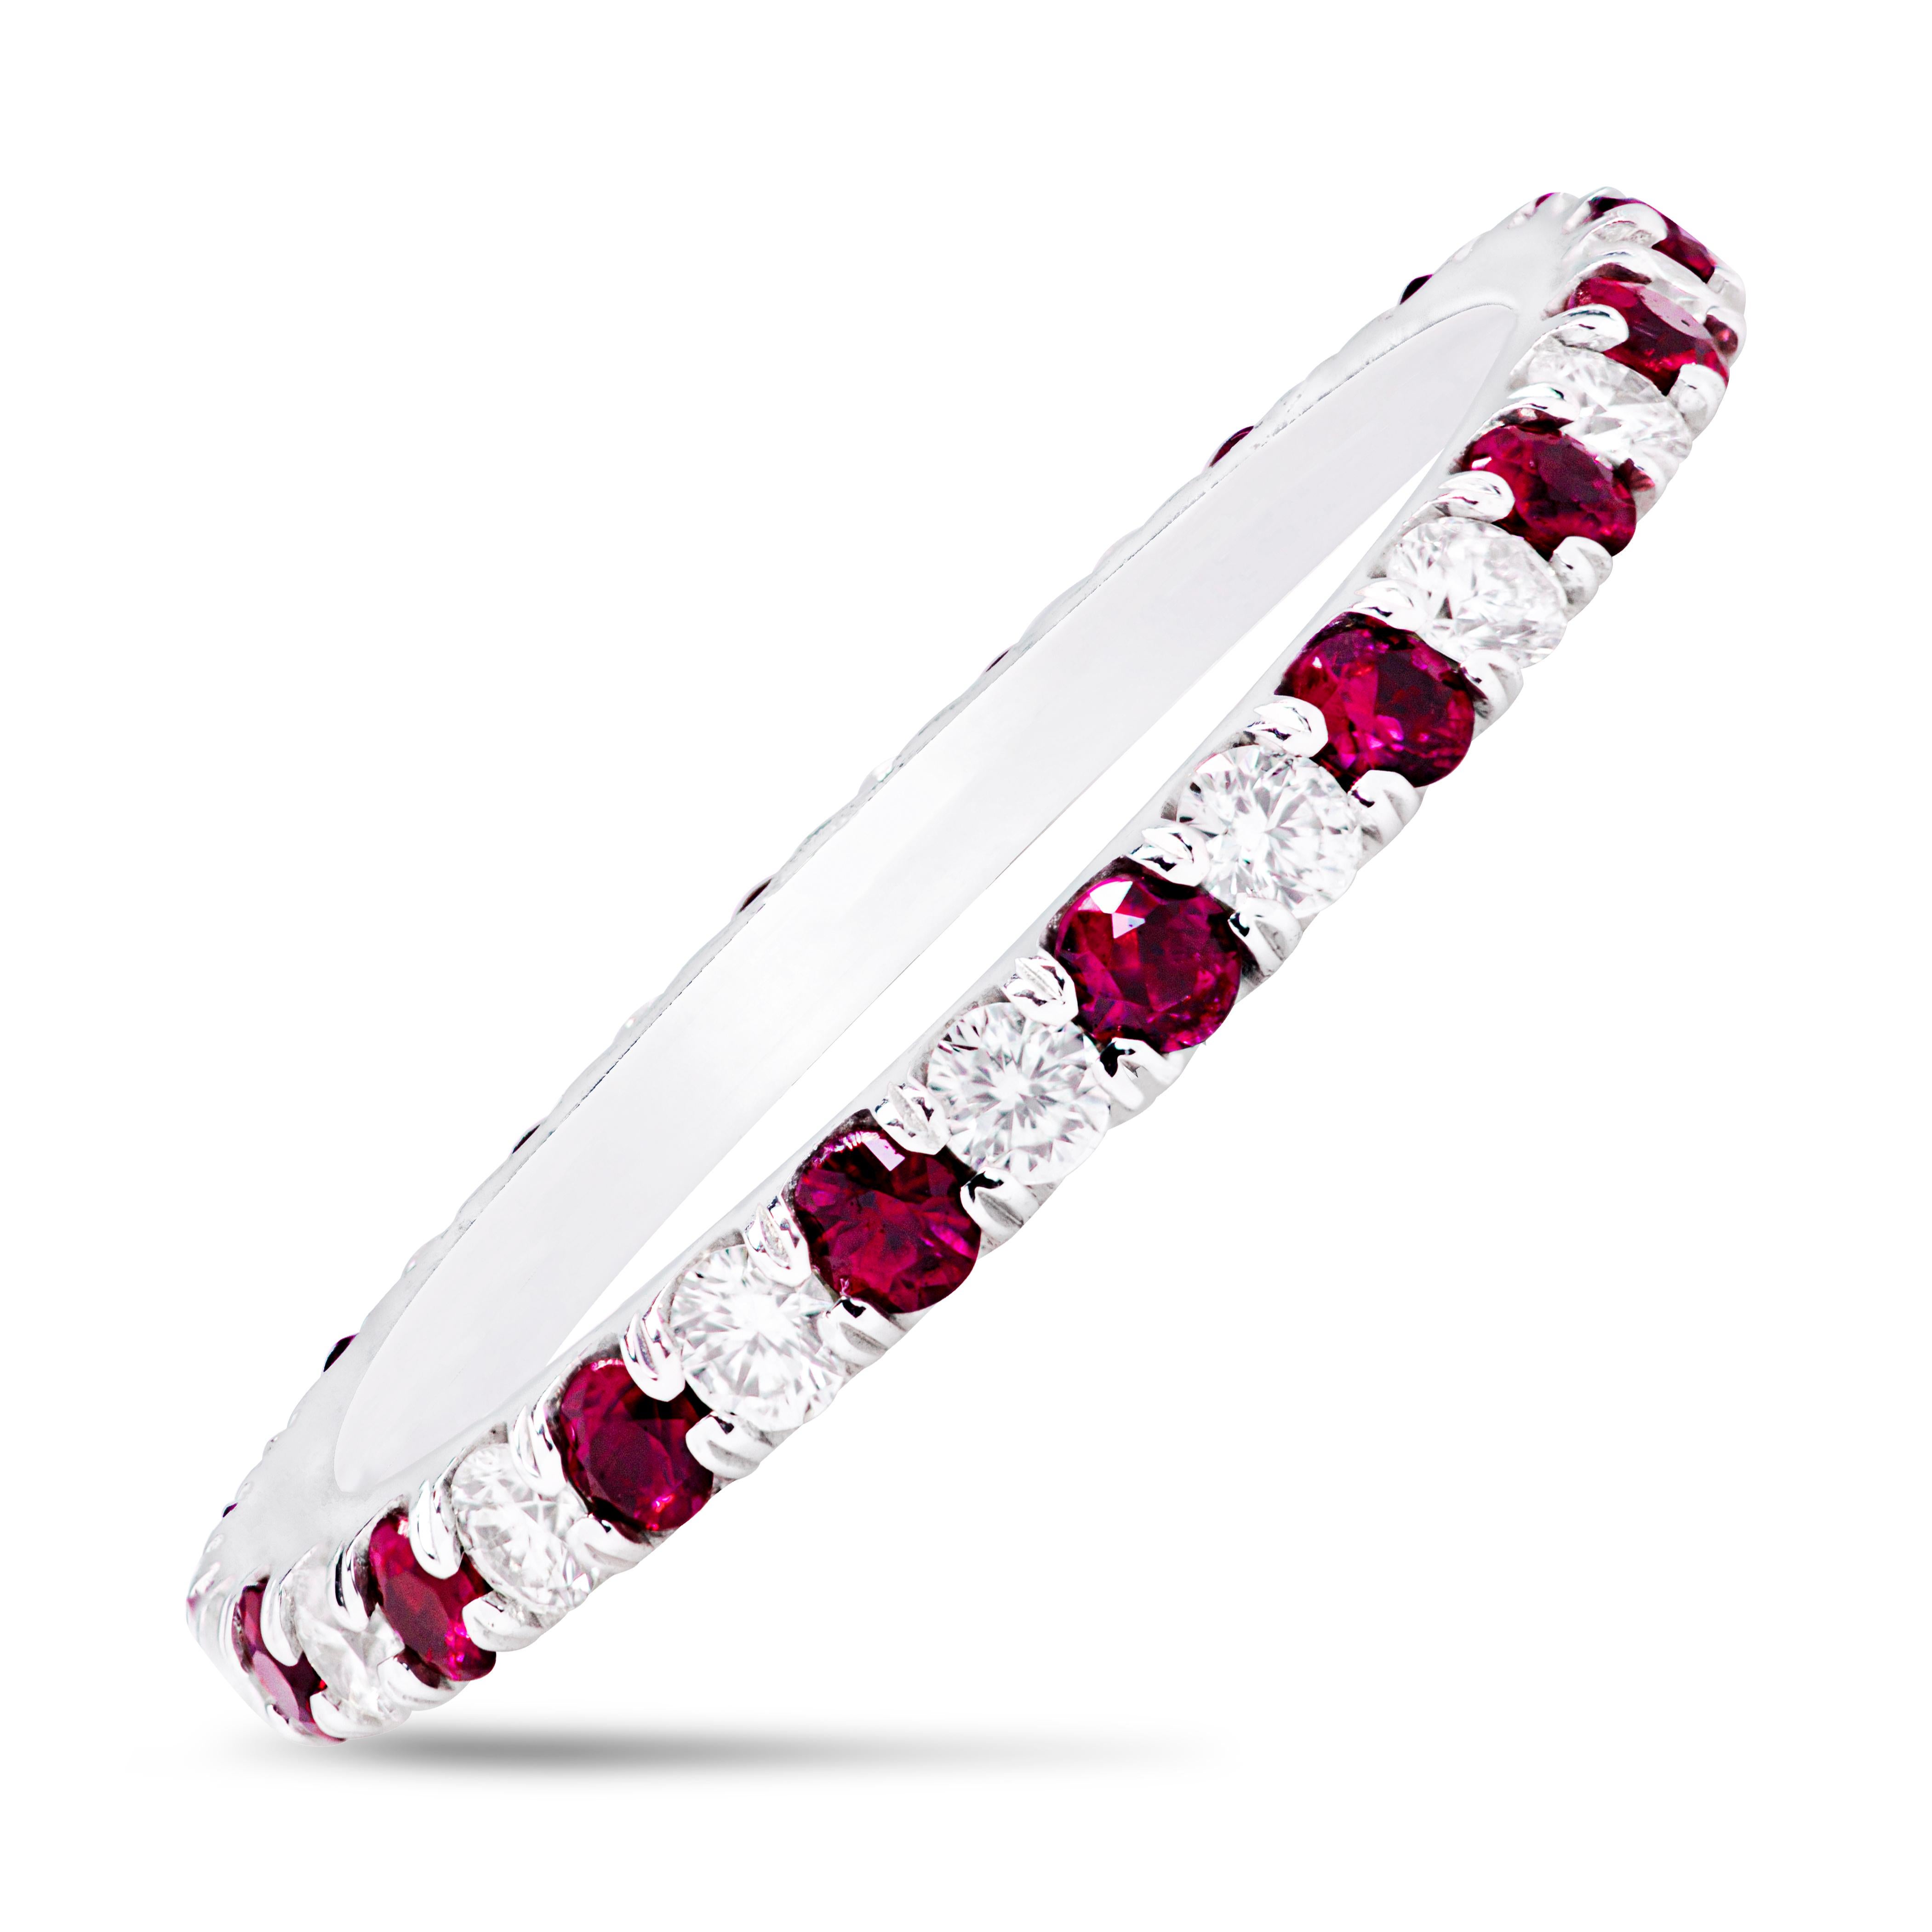 This wedding band features 18 natural rubies weighing 0.44 carats total that alternate with 18 round brilliant diamonds weighing 0.34 carats total. Made with 18K White Gold. Size 6.5 US.

Roman Malakov is a custom house, specializing in creating